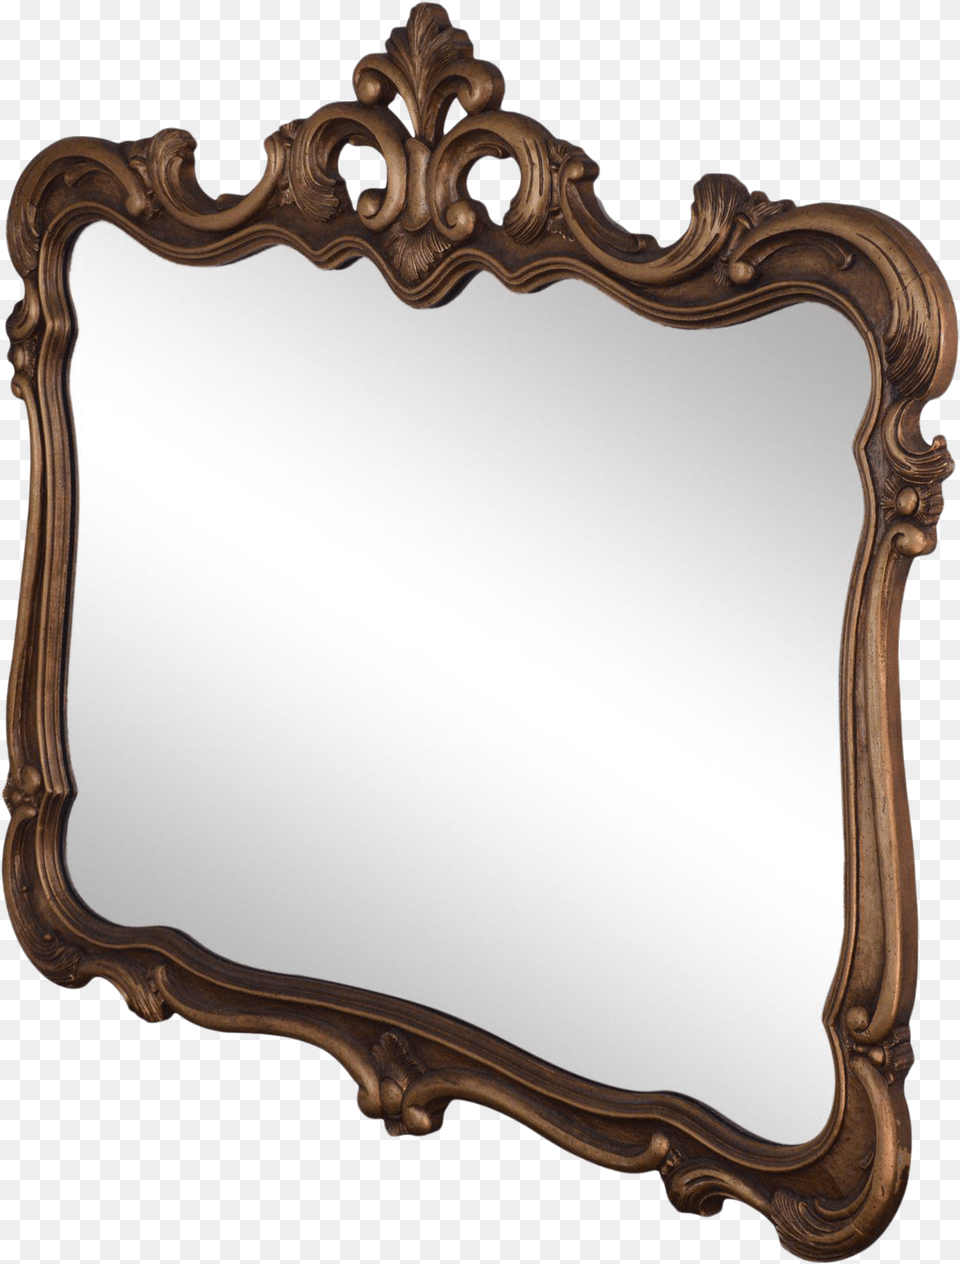 Vintage French Louis Xv Style Gold Frame Wall Mirror Crowned Top Png Image